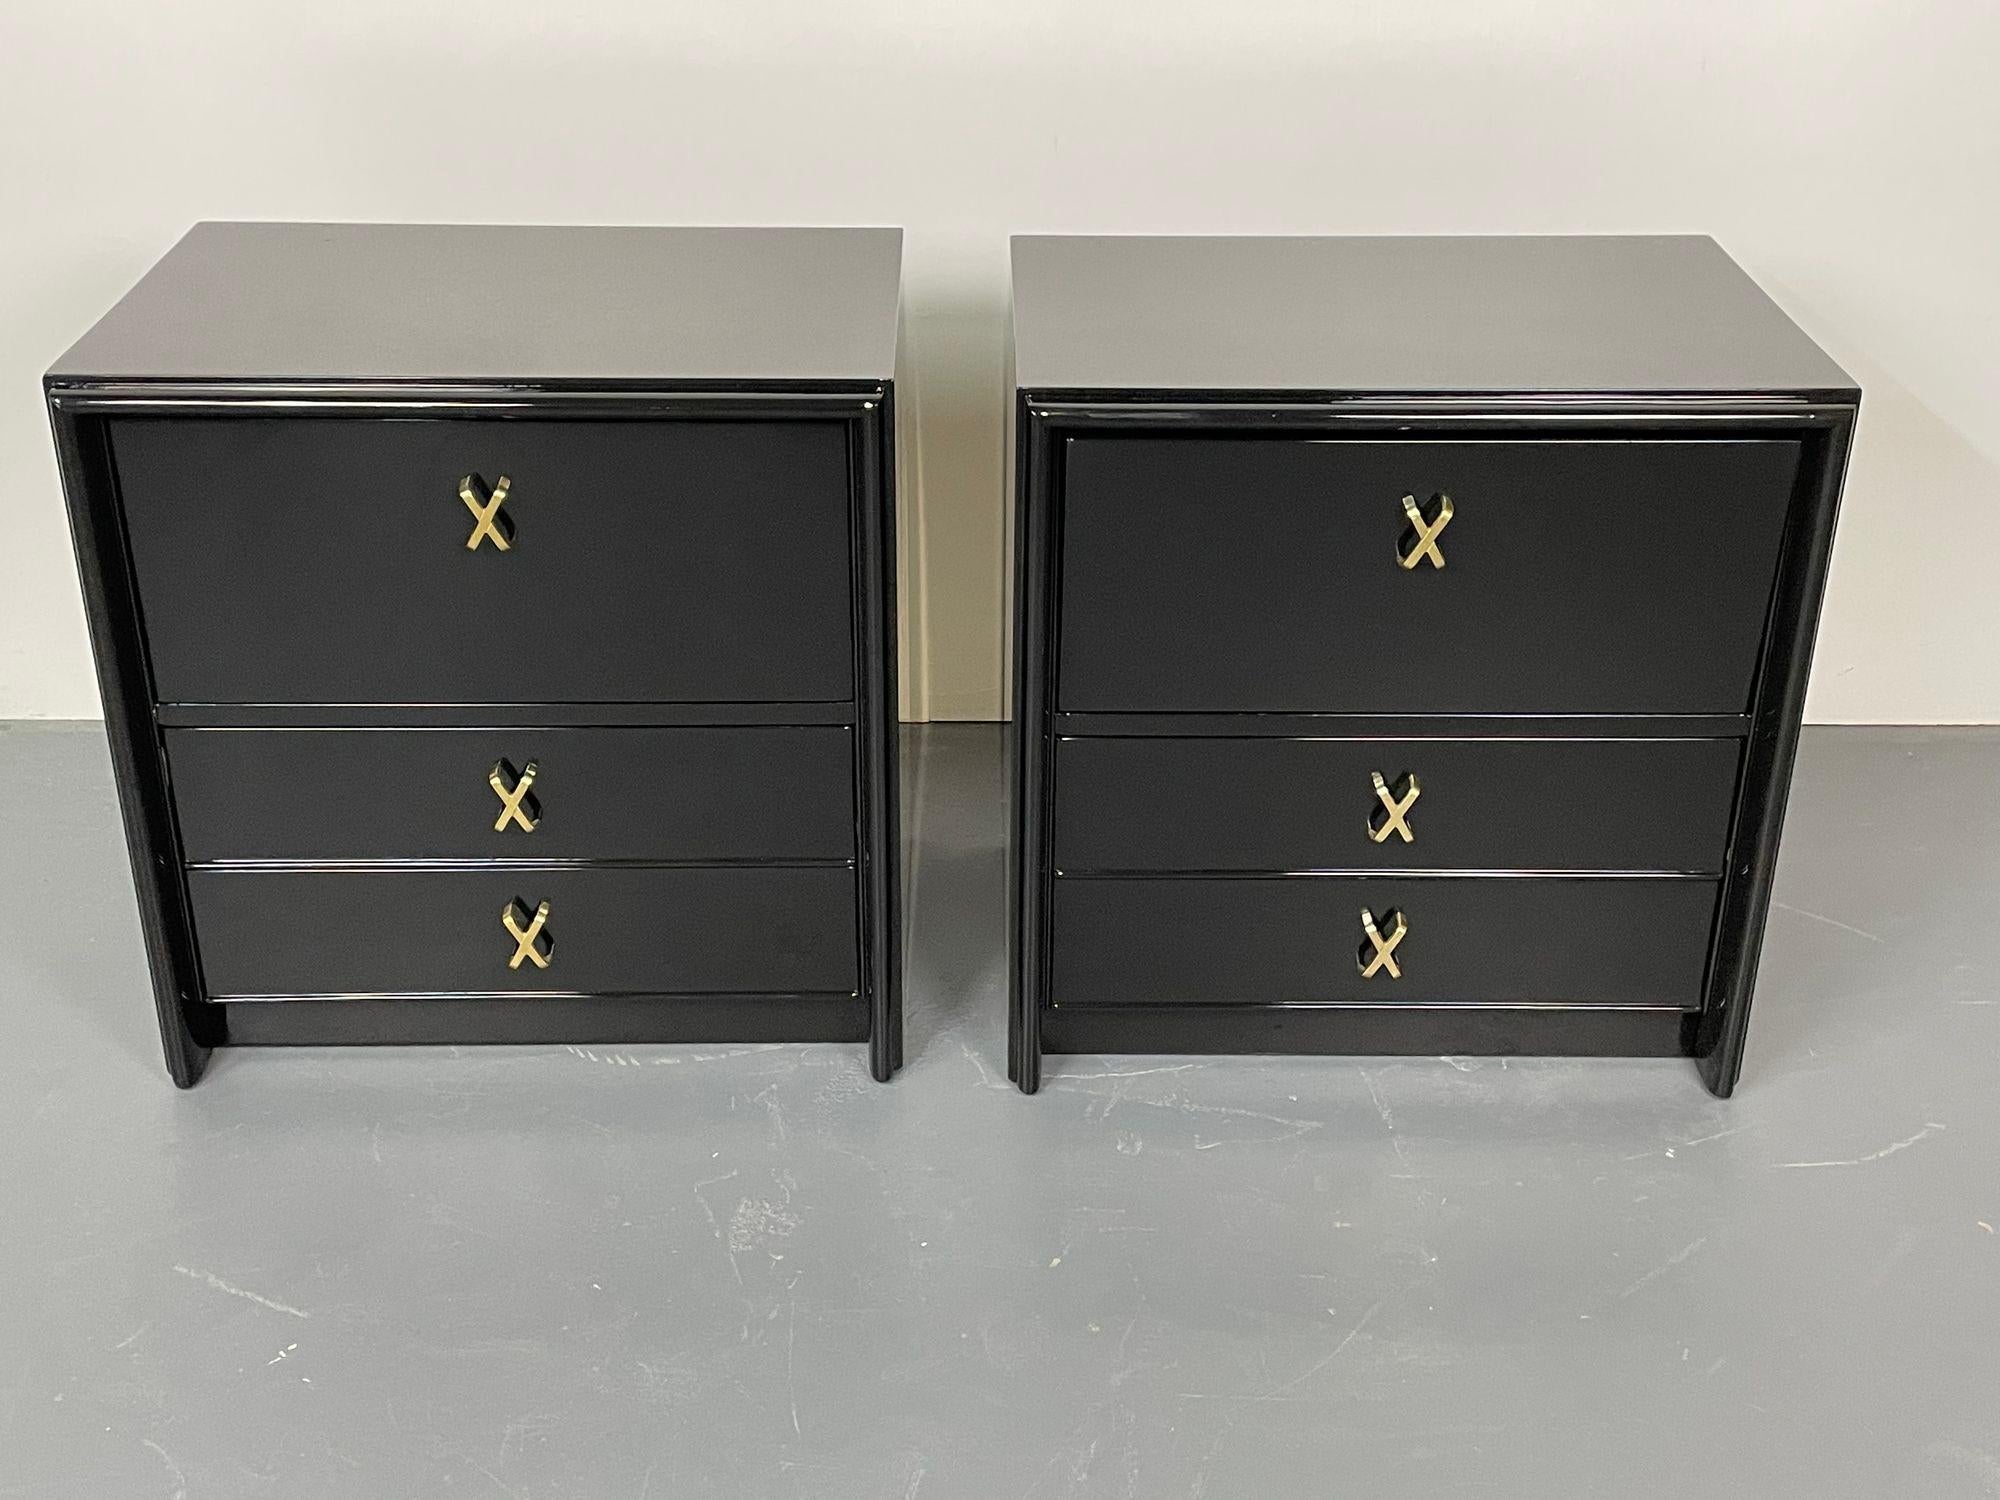 Pair of Mid-Century Modern night stands, bedside tables by John Stuart, ebony, fully refinished.

John Stuart Paul Frankl Designed Pair of Bedside Stands in the finest black lacquered finish. Part of a complete bedroom set sold separately this